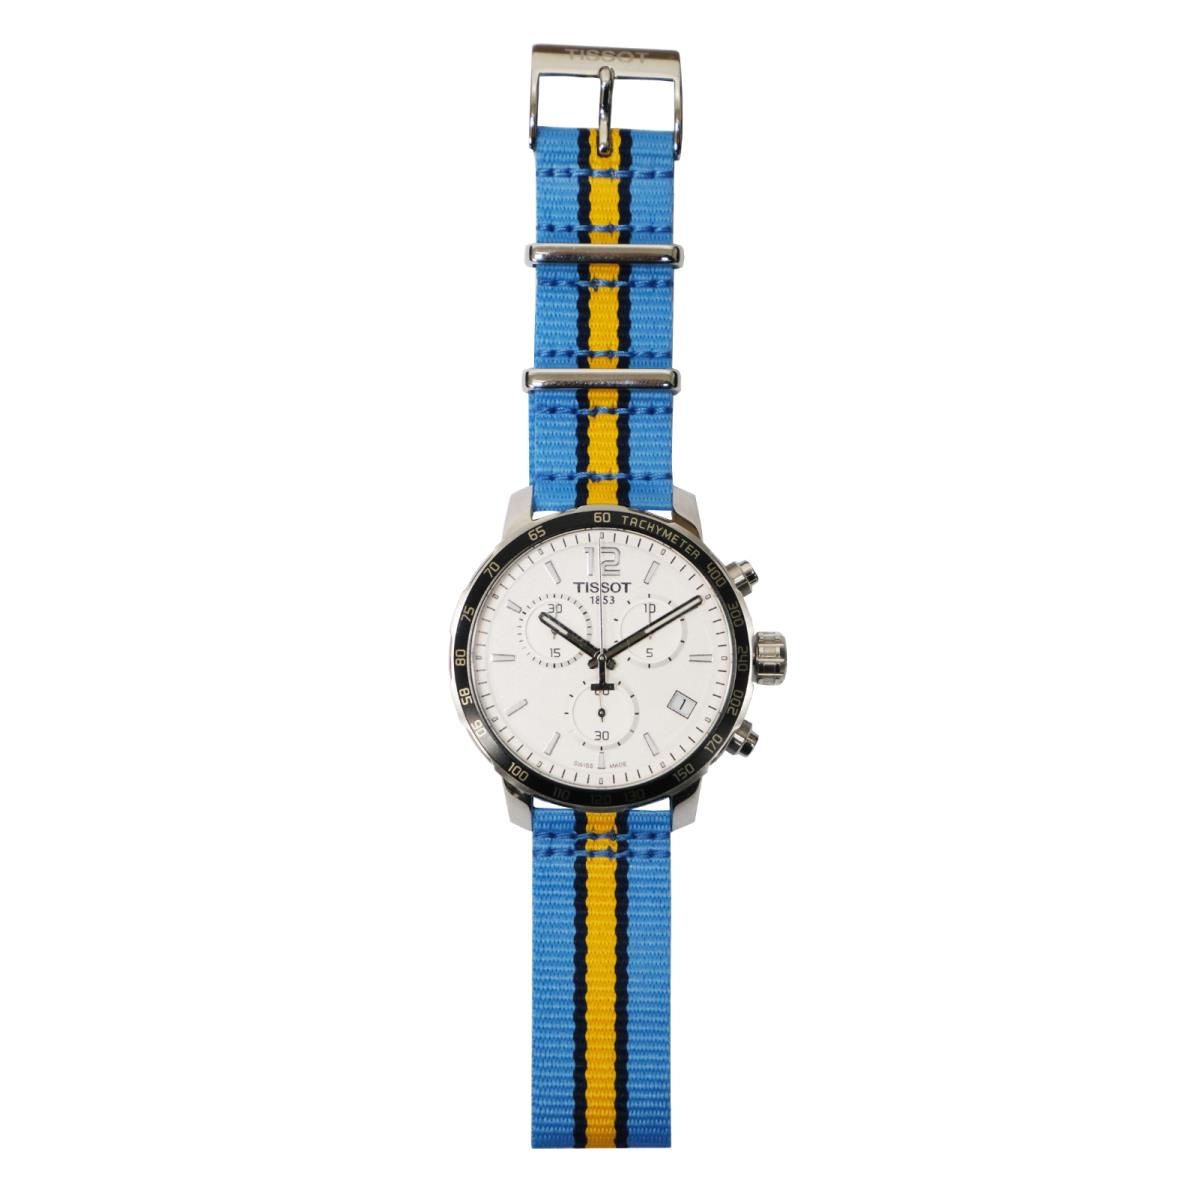 Tissot watch  - Silver Dial, Blue Band